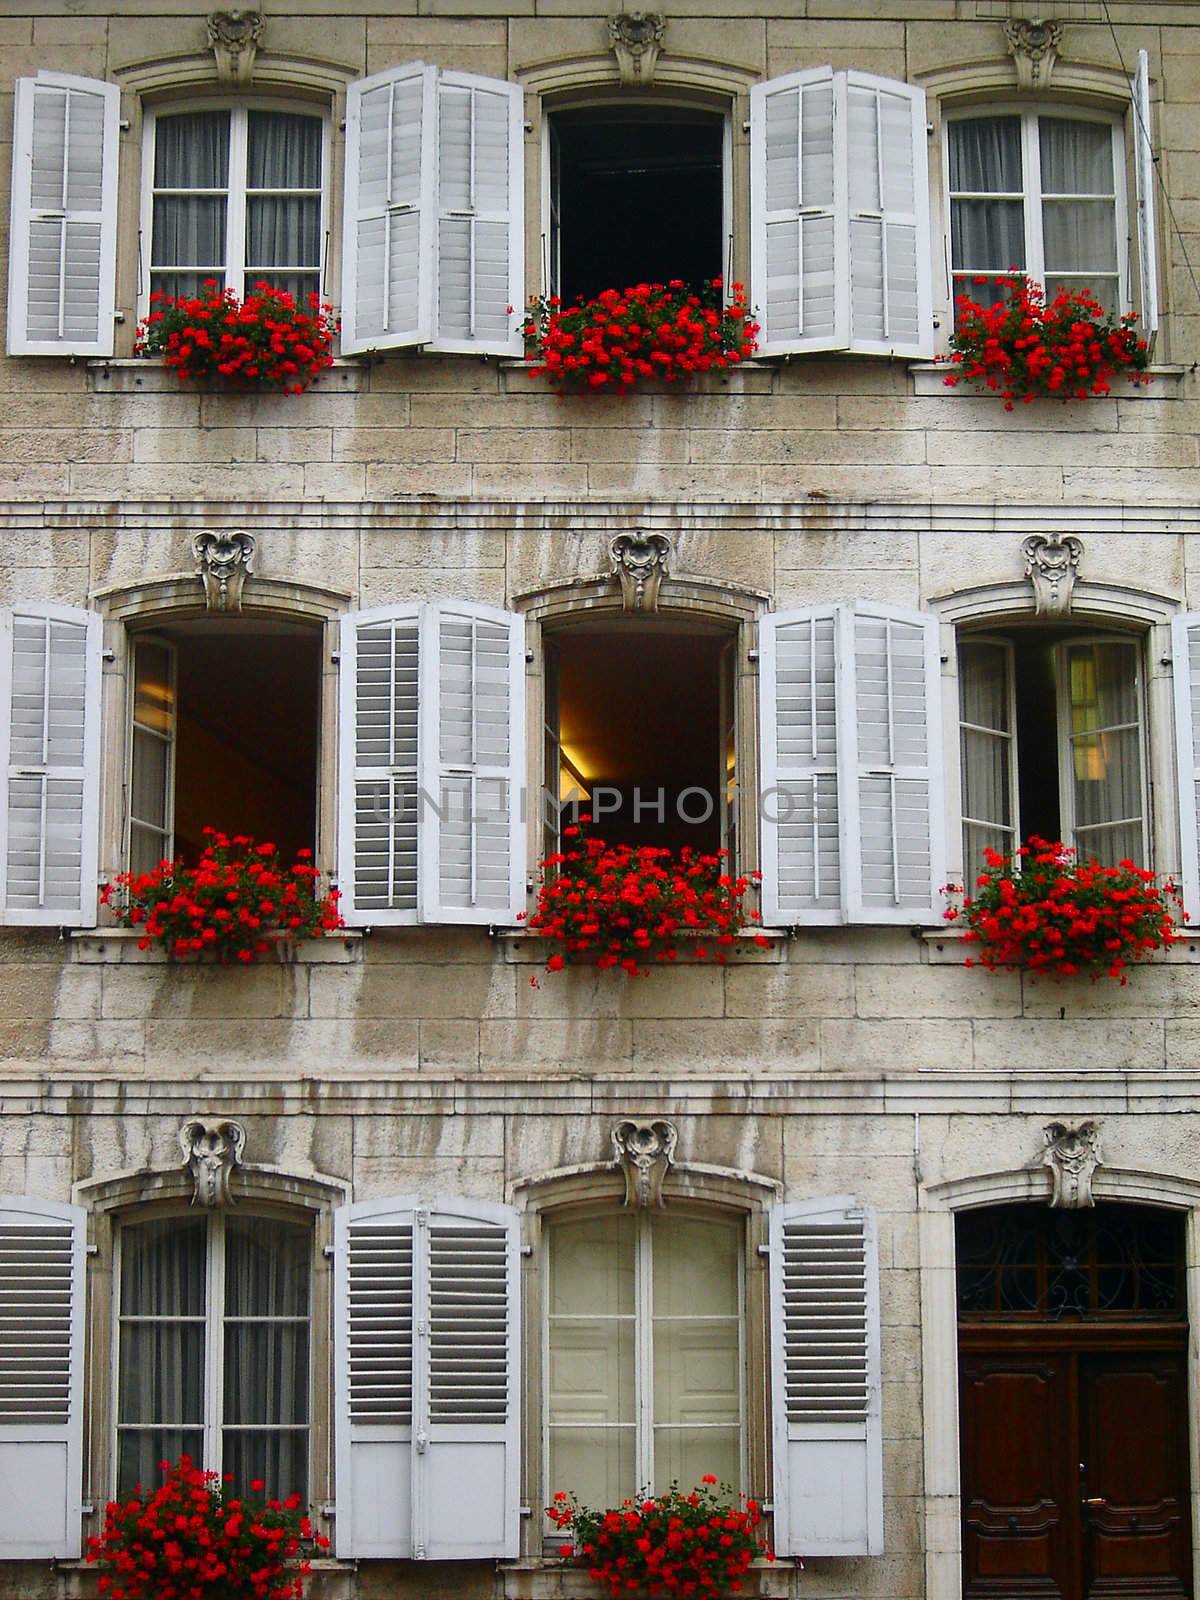 typical swiss fa�ade with flower pots in windows by raalves